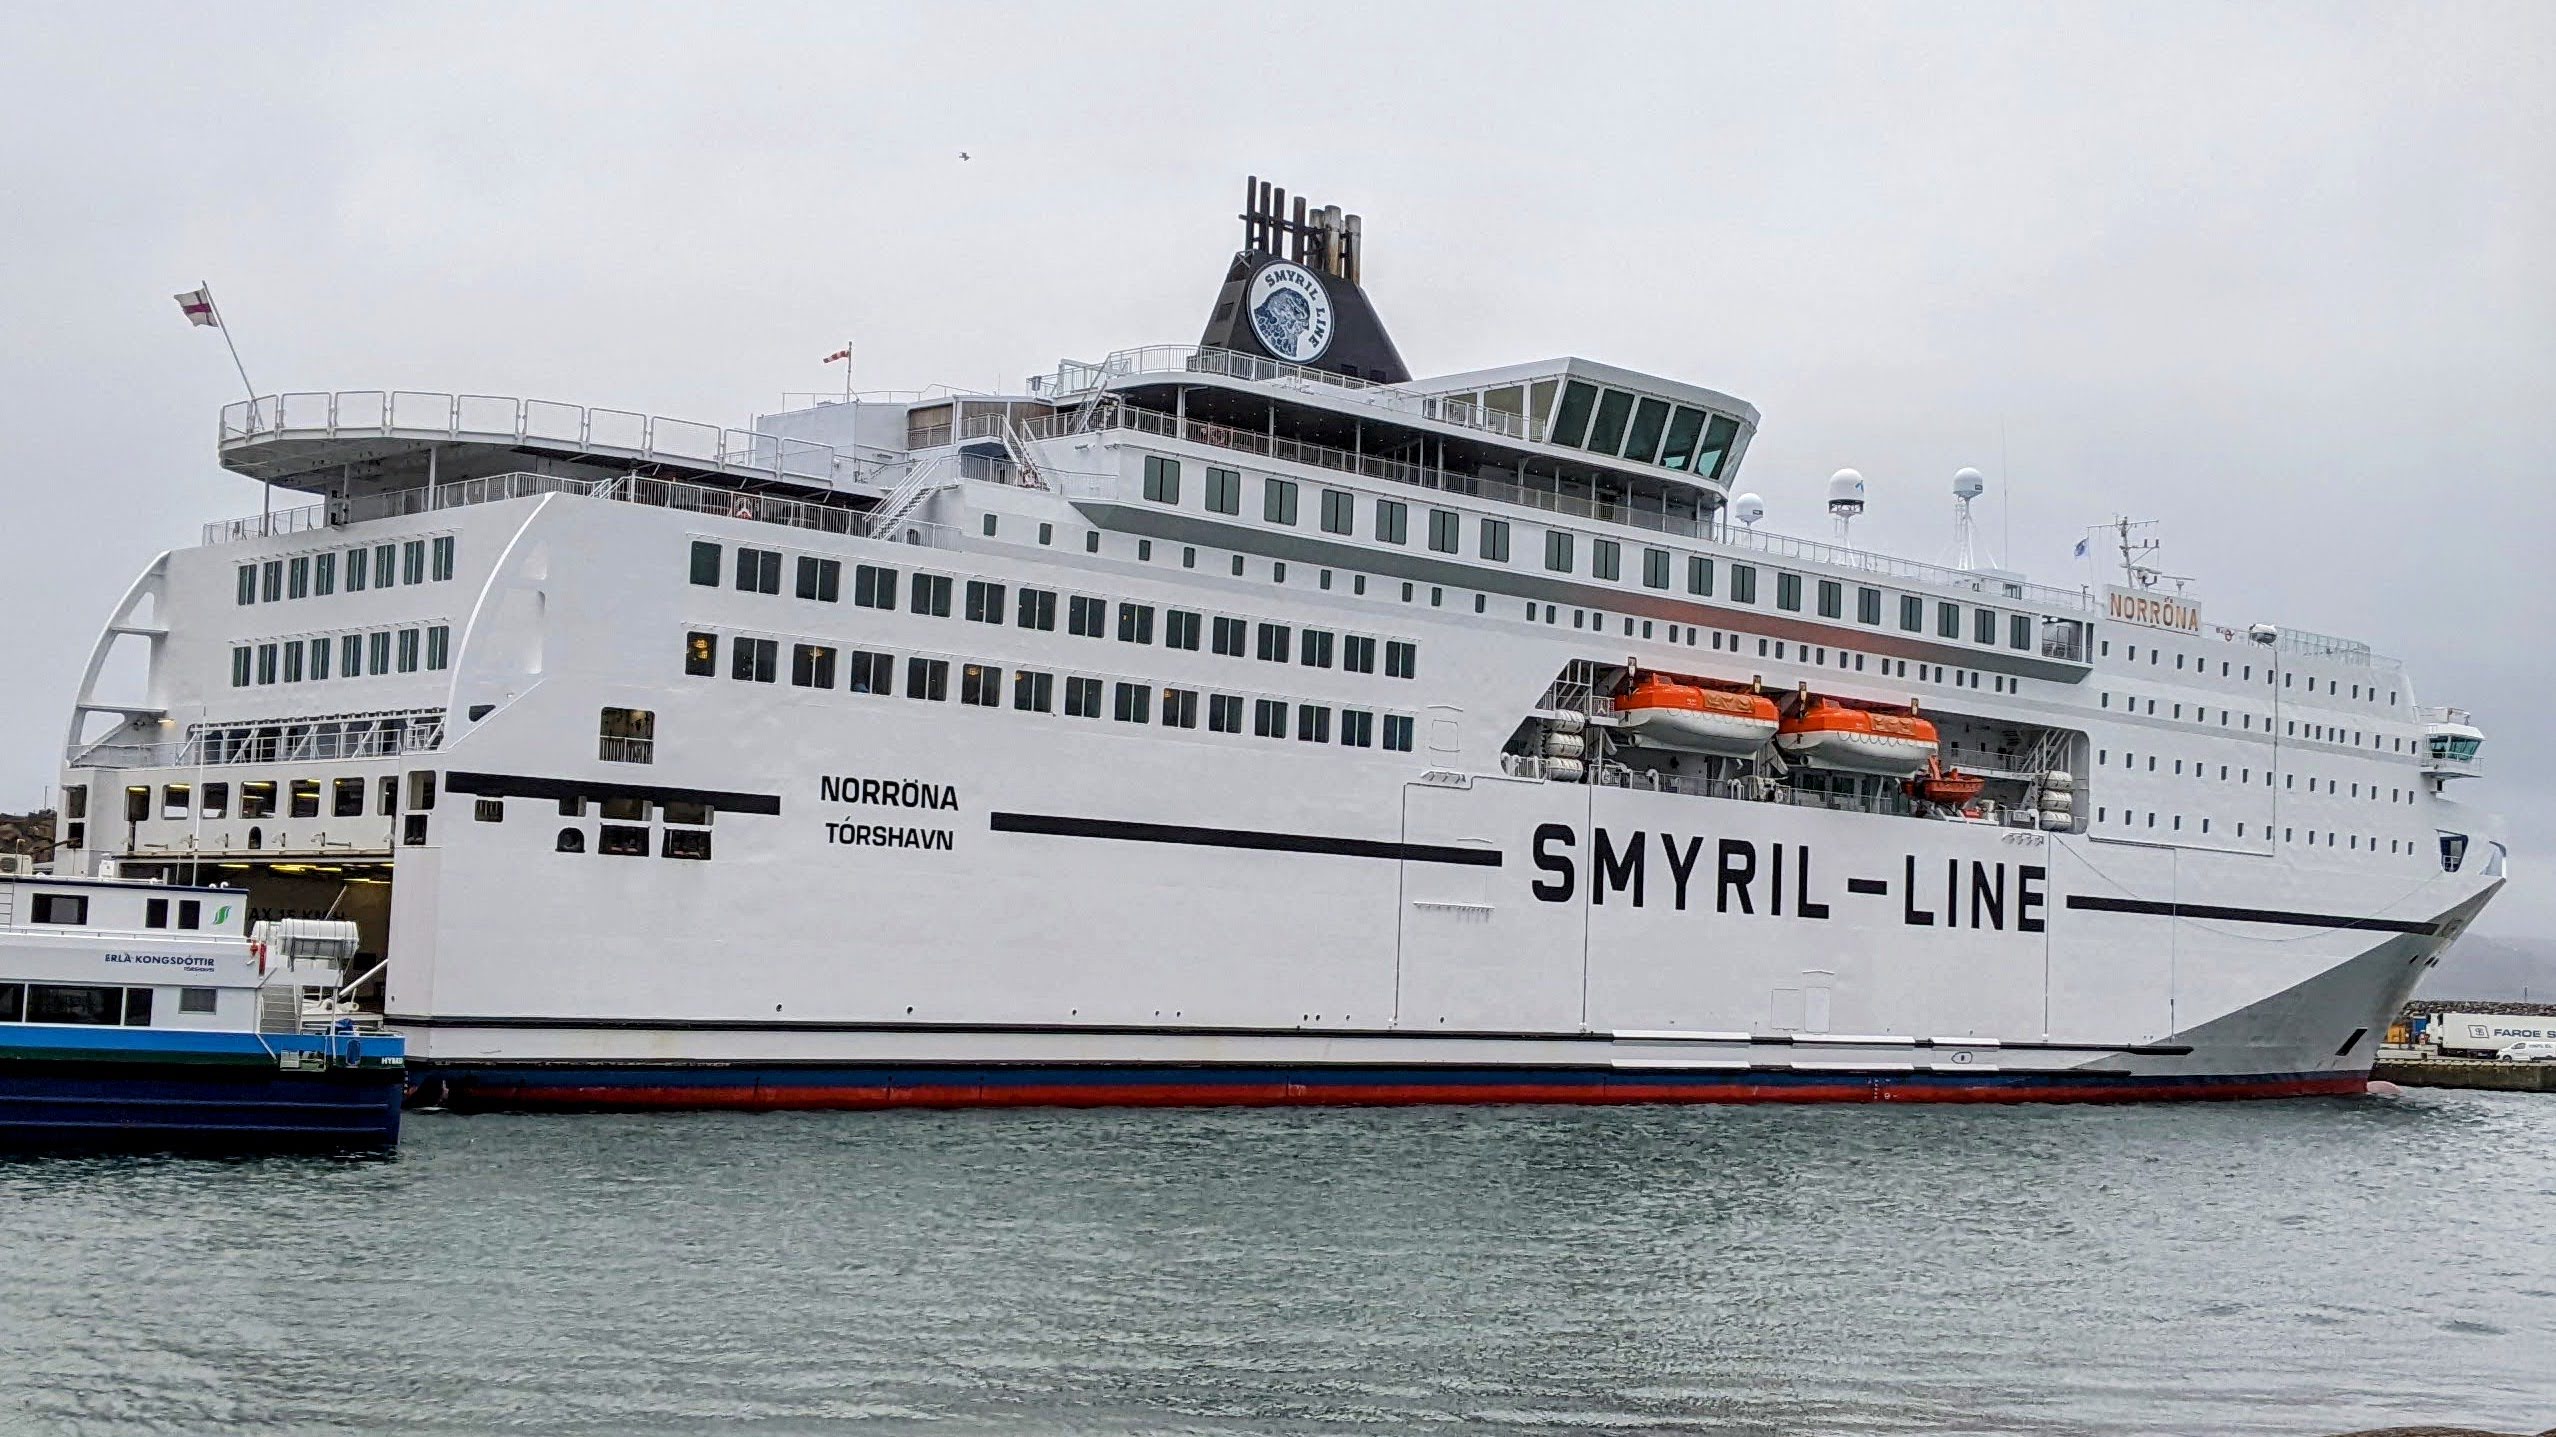 Smyril Line ferry from Faroe Islands to Iceland